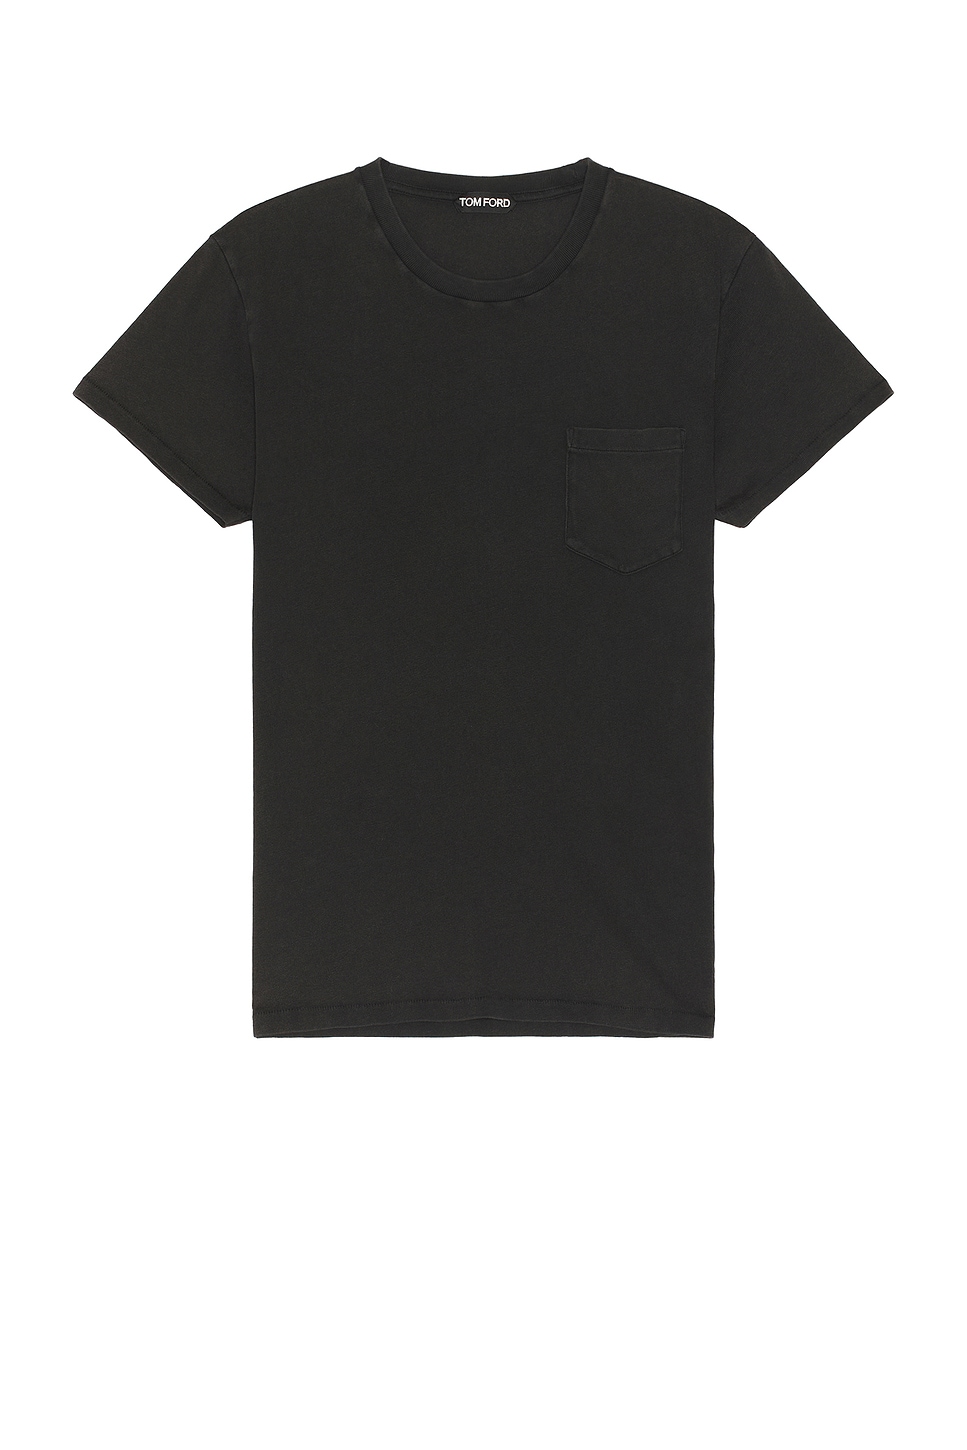 Image 1 of TOM FORD Cold Dye Cotton T-Shirt in Charcoal